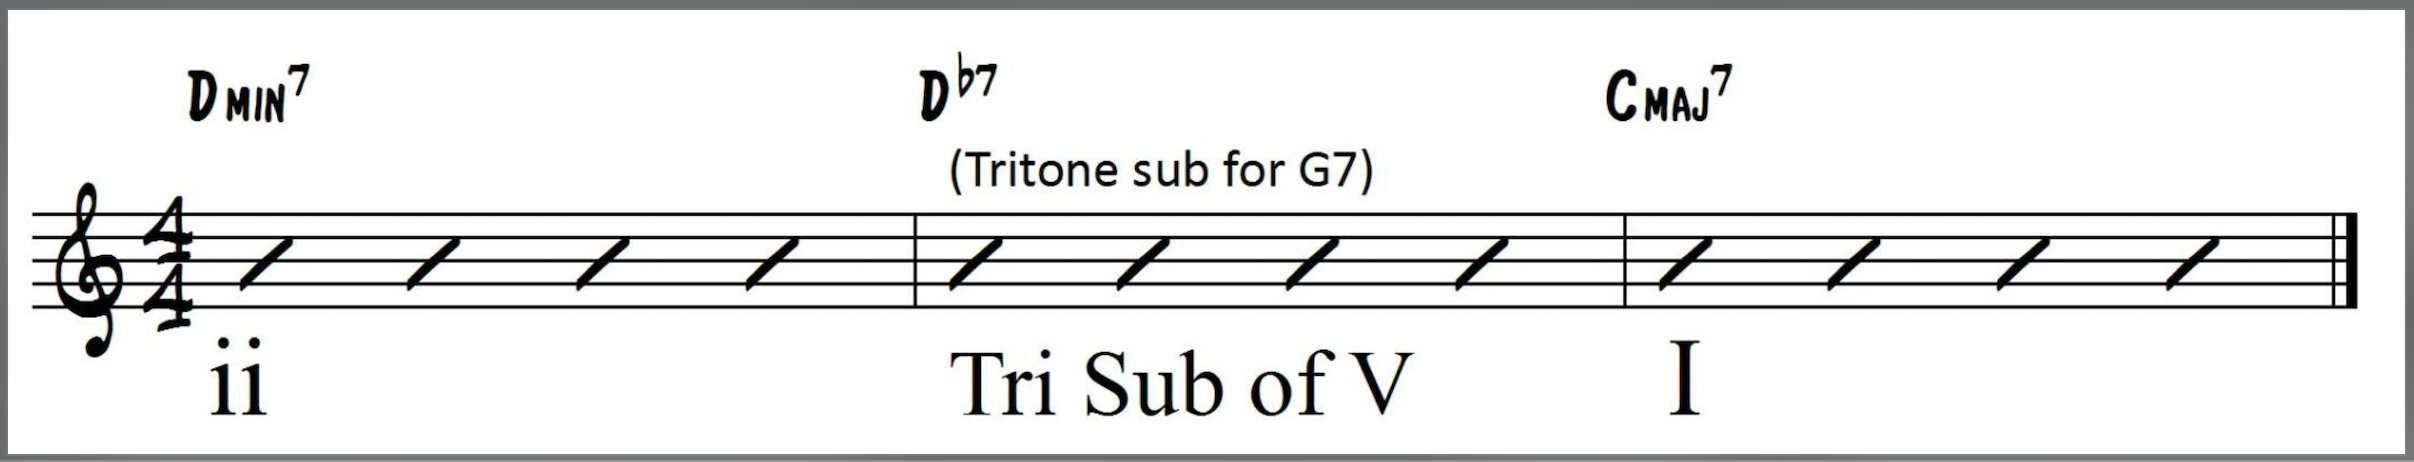 Tritone Substitution of V in a Chord Progression in the key of C major